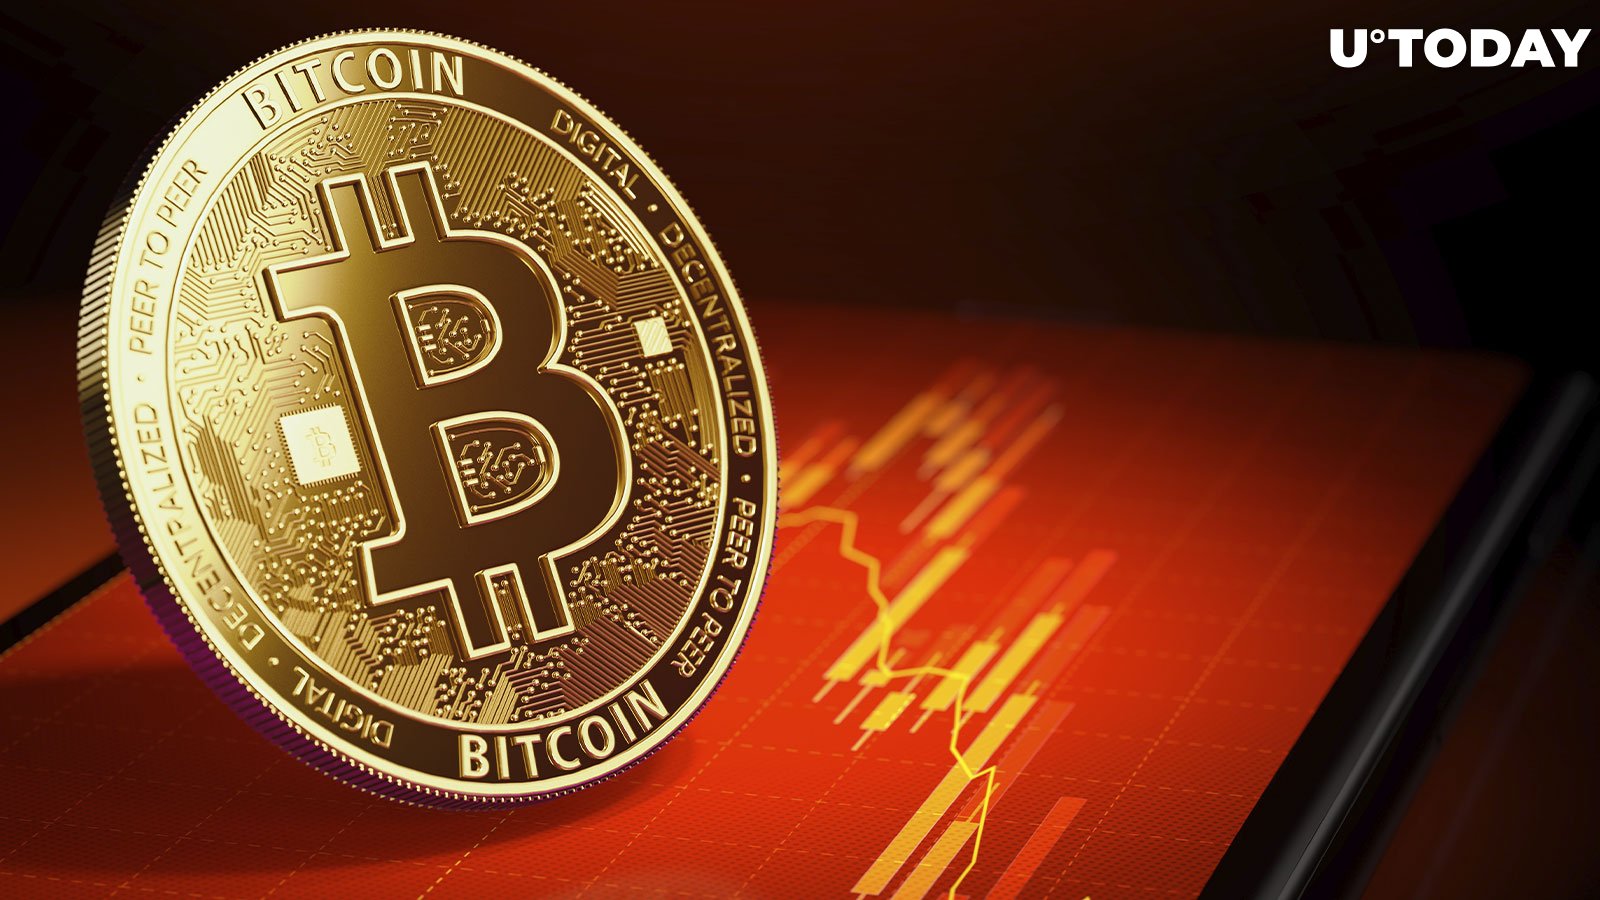 Bitcoin (BTC) Takes a Nosedive: What Is Behind Recent Crash?